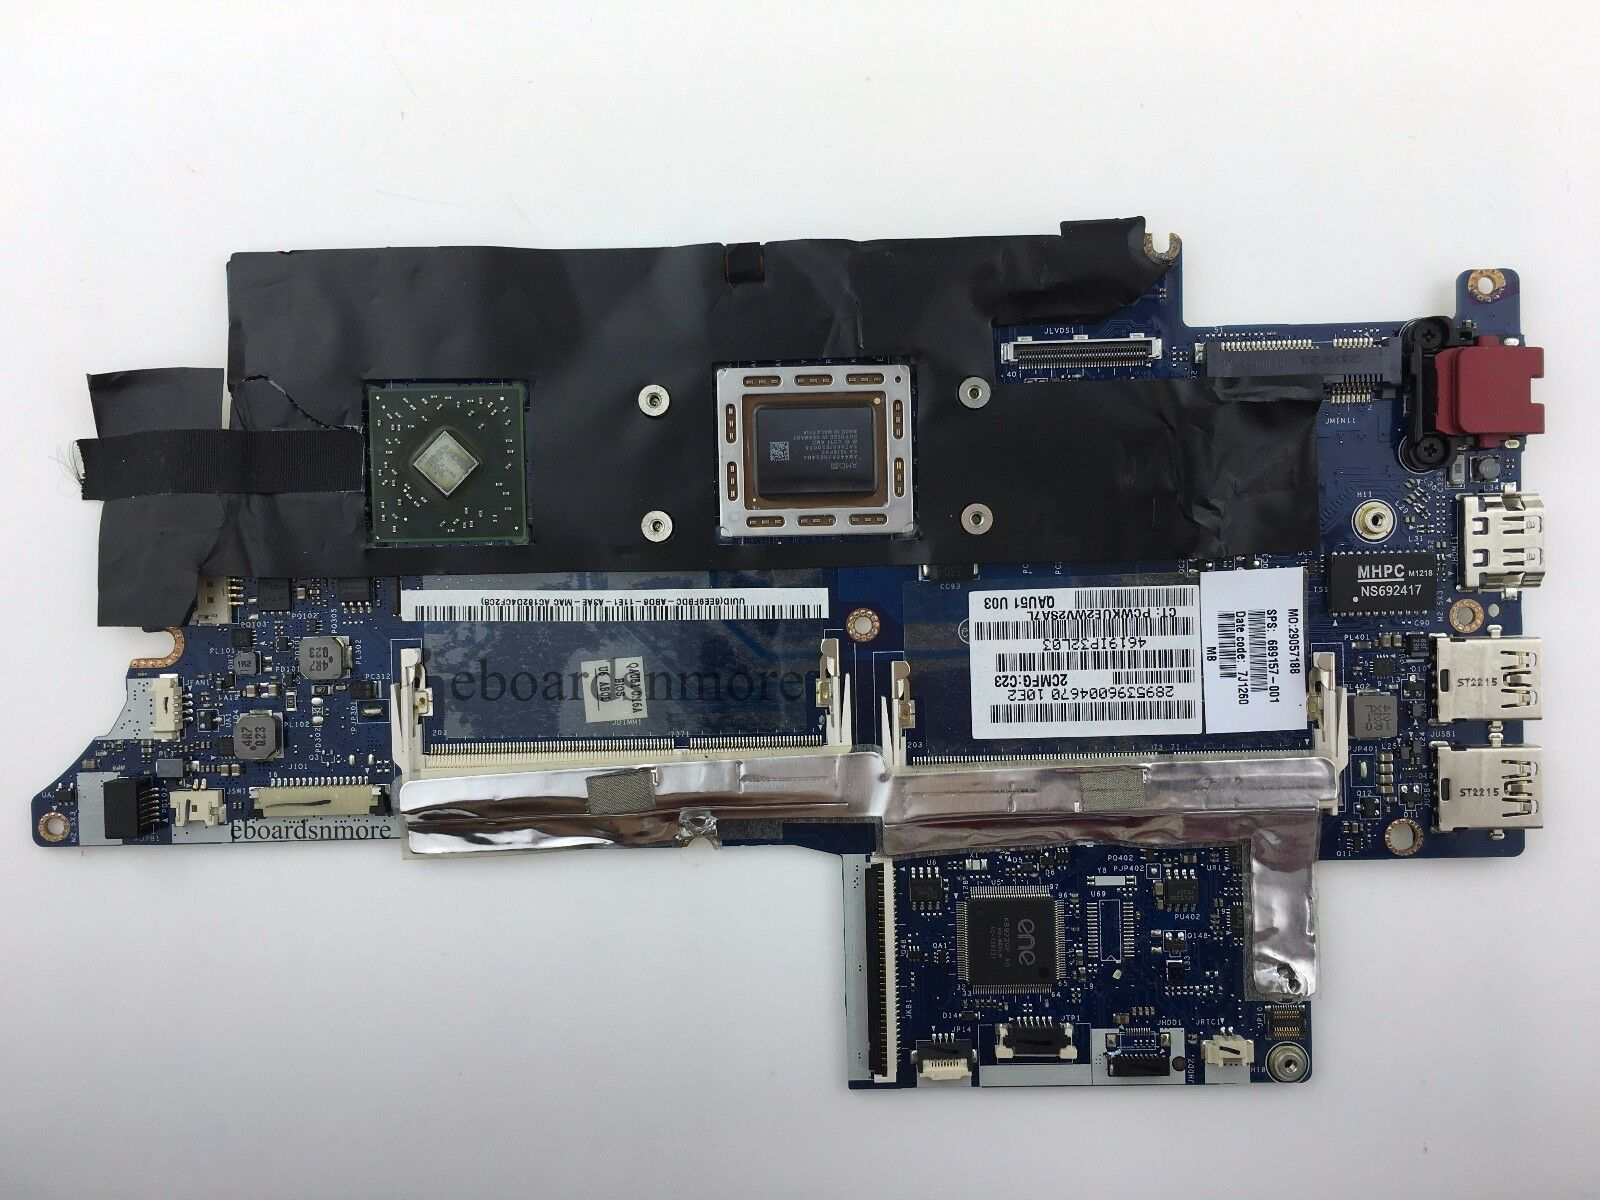 689157-001 LA-8731P for HP ENVY 6 laptop motherboard A6-4455M CPU Compatible CPU Brand: AMD BGA MPN: Does N